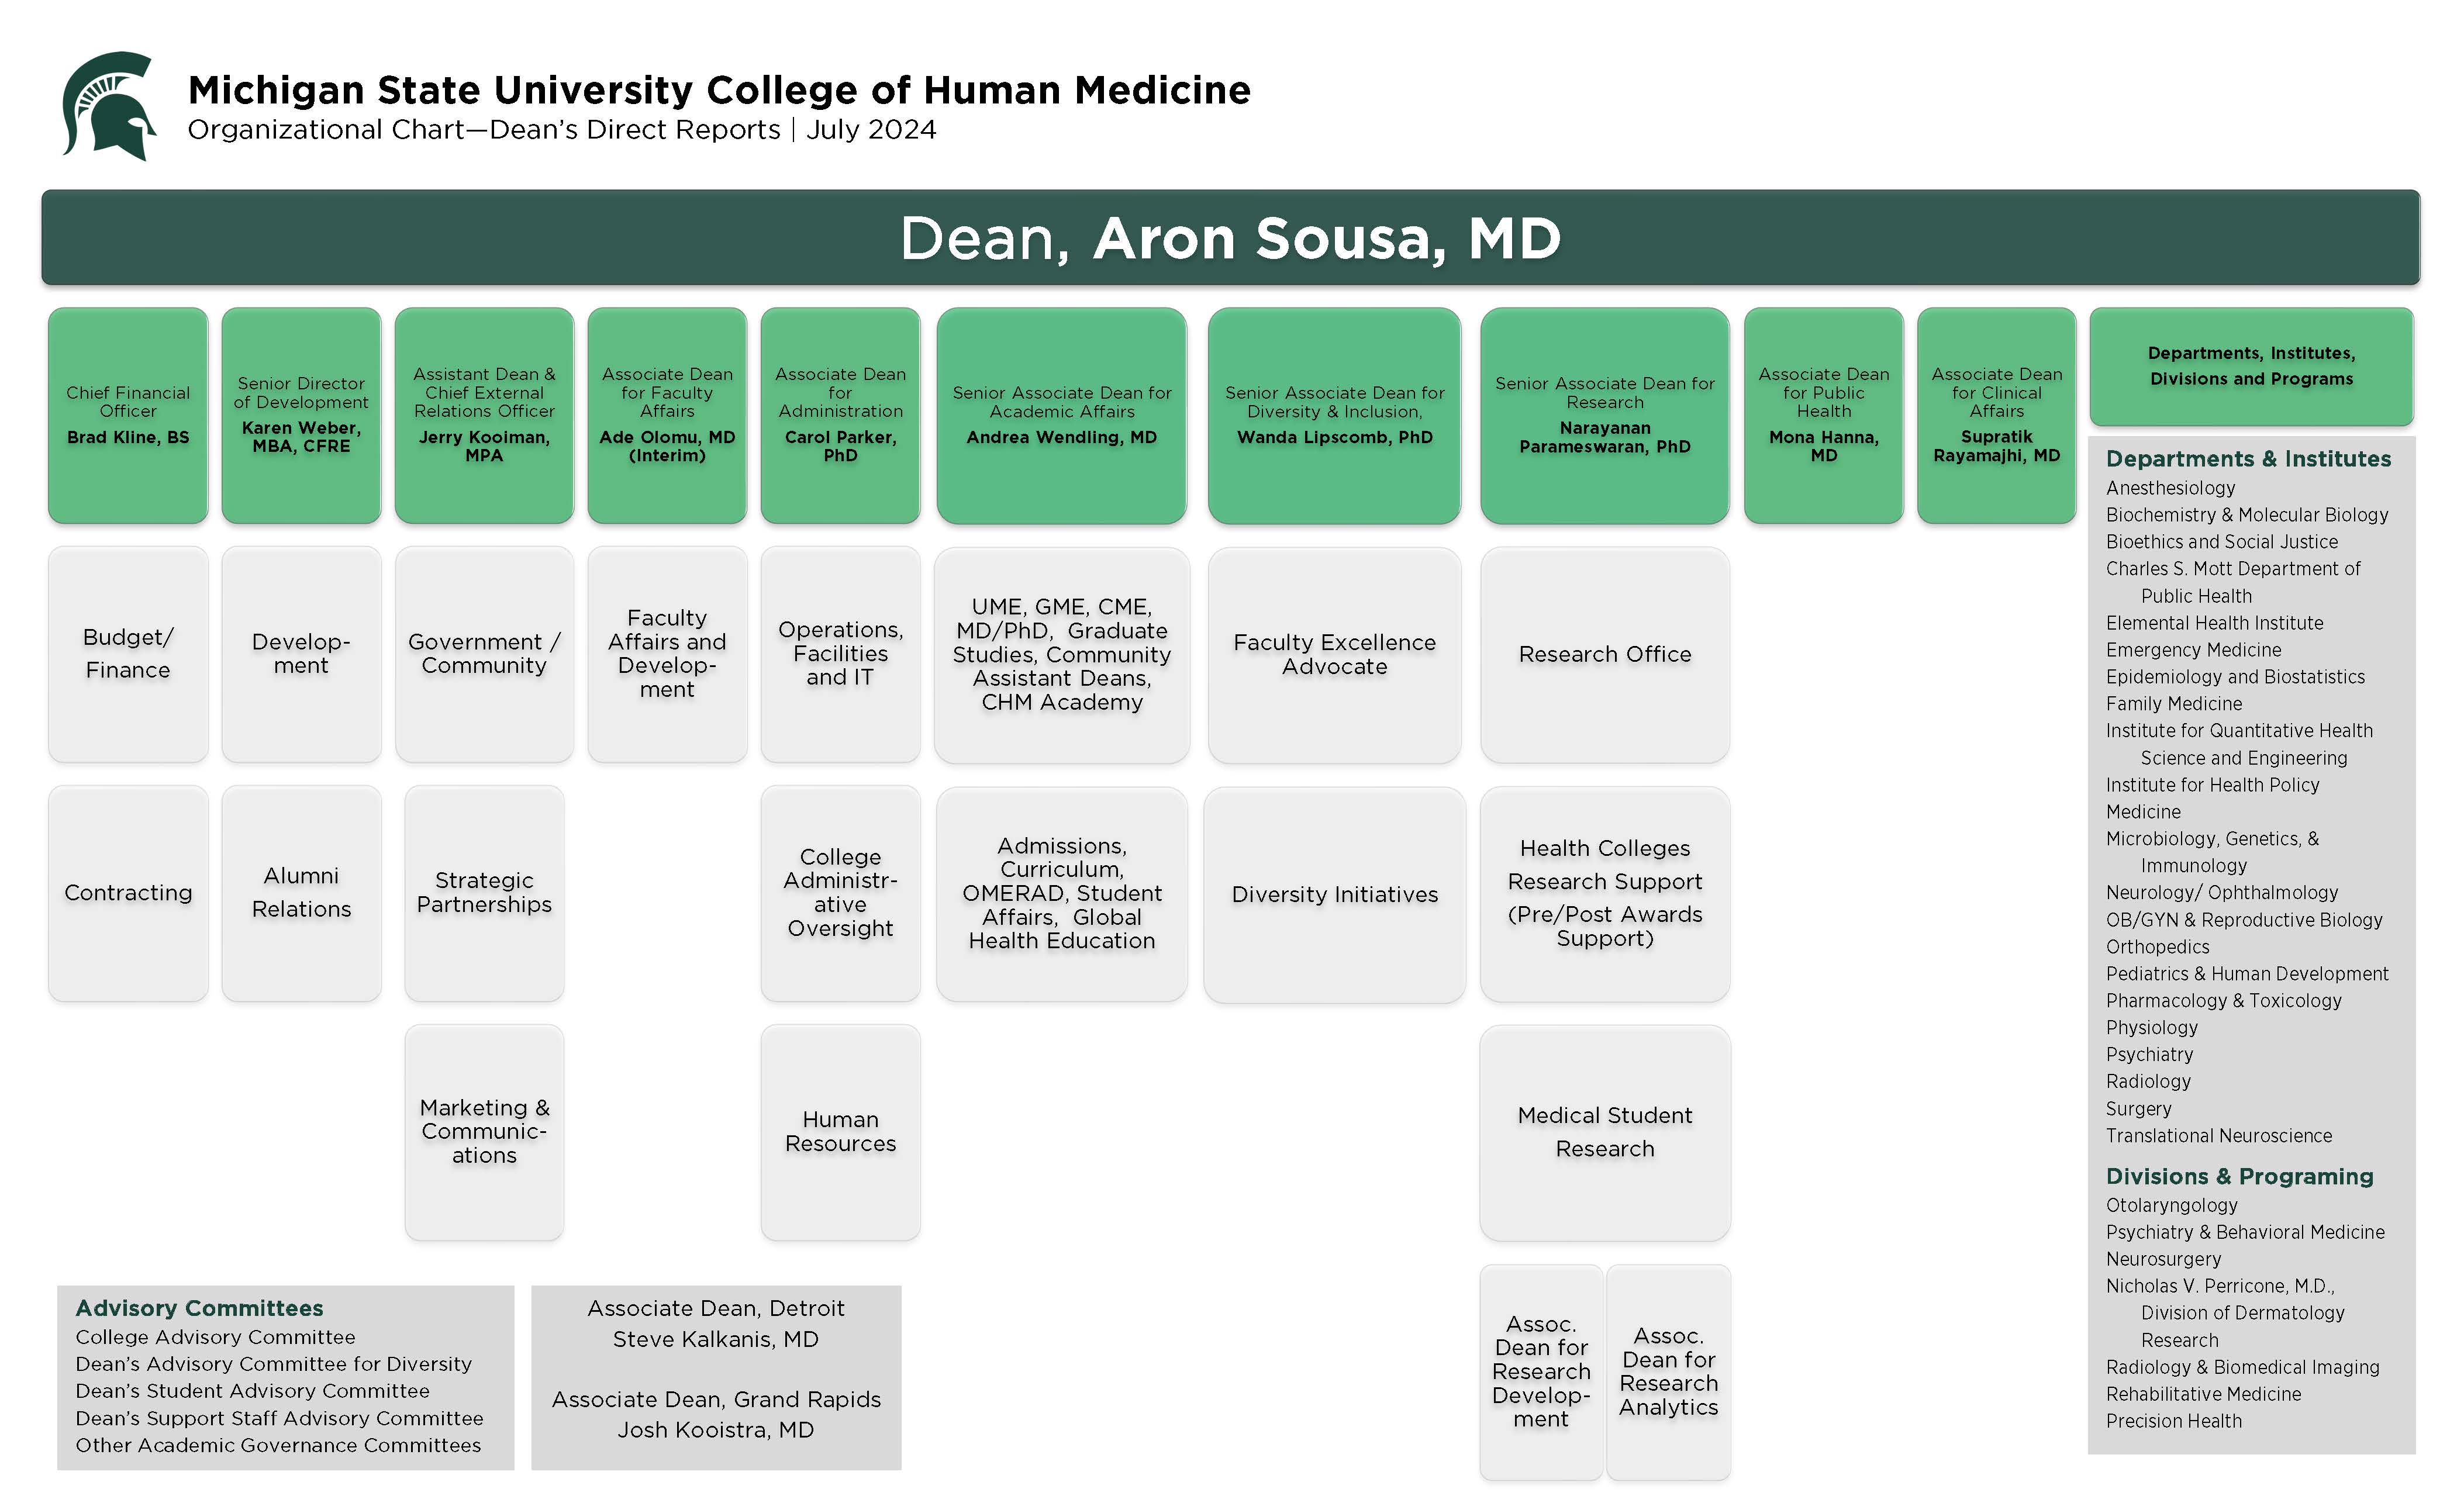 College organizational chart. Full alt text included below.